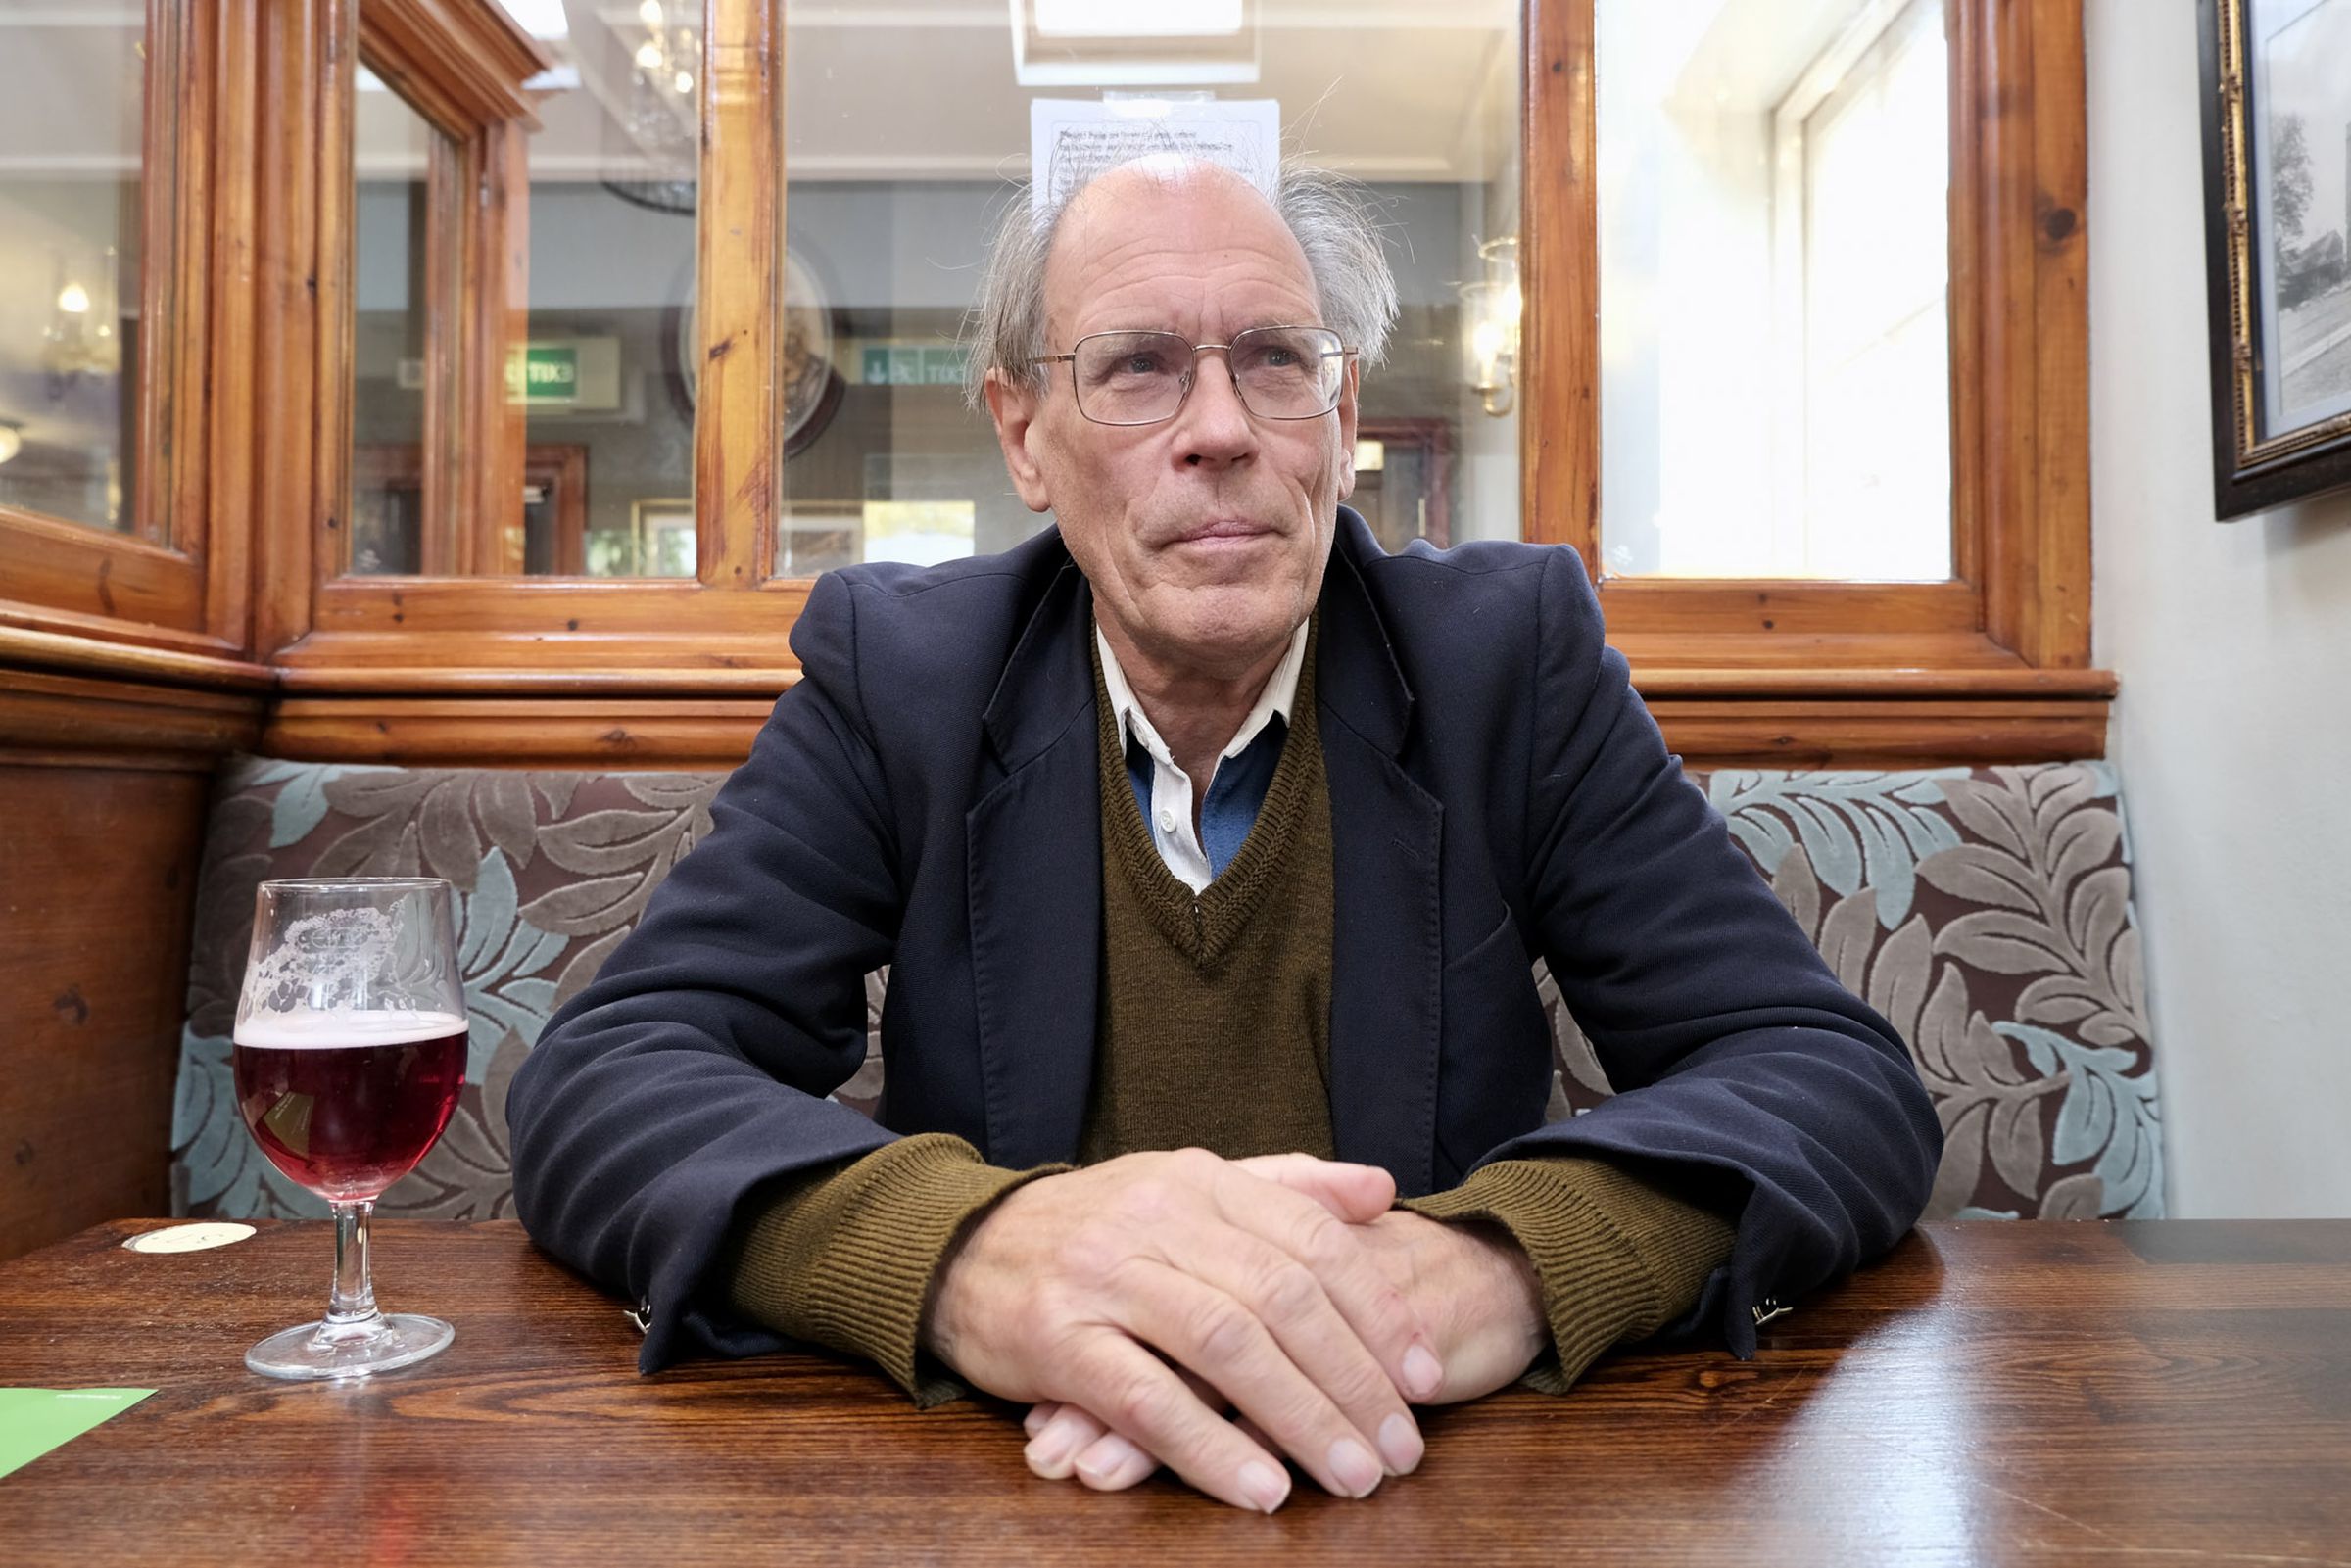 A photo of a man sitting in a pub. He’s balding, wearing spectacles, and suit jacket over a V-neck jumper. His hands are folded in front of him on the table next to a half-drunk pint of beer. 